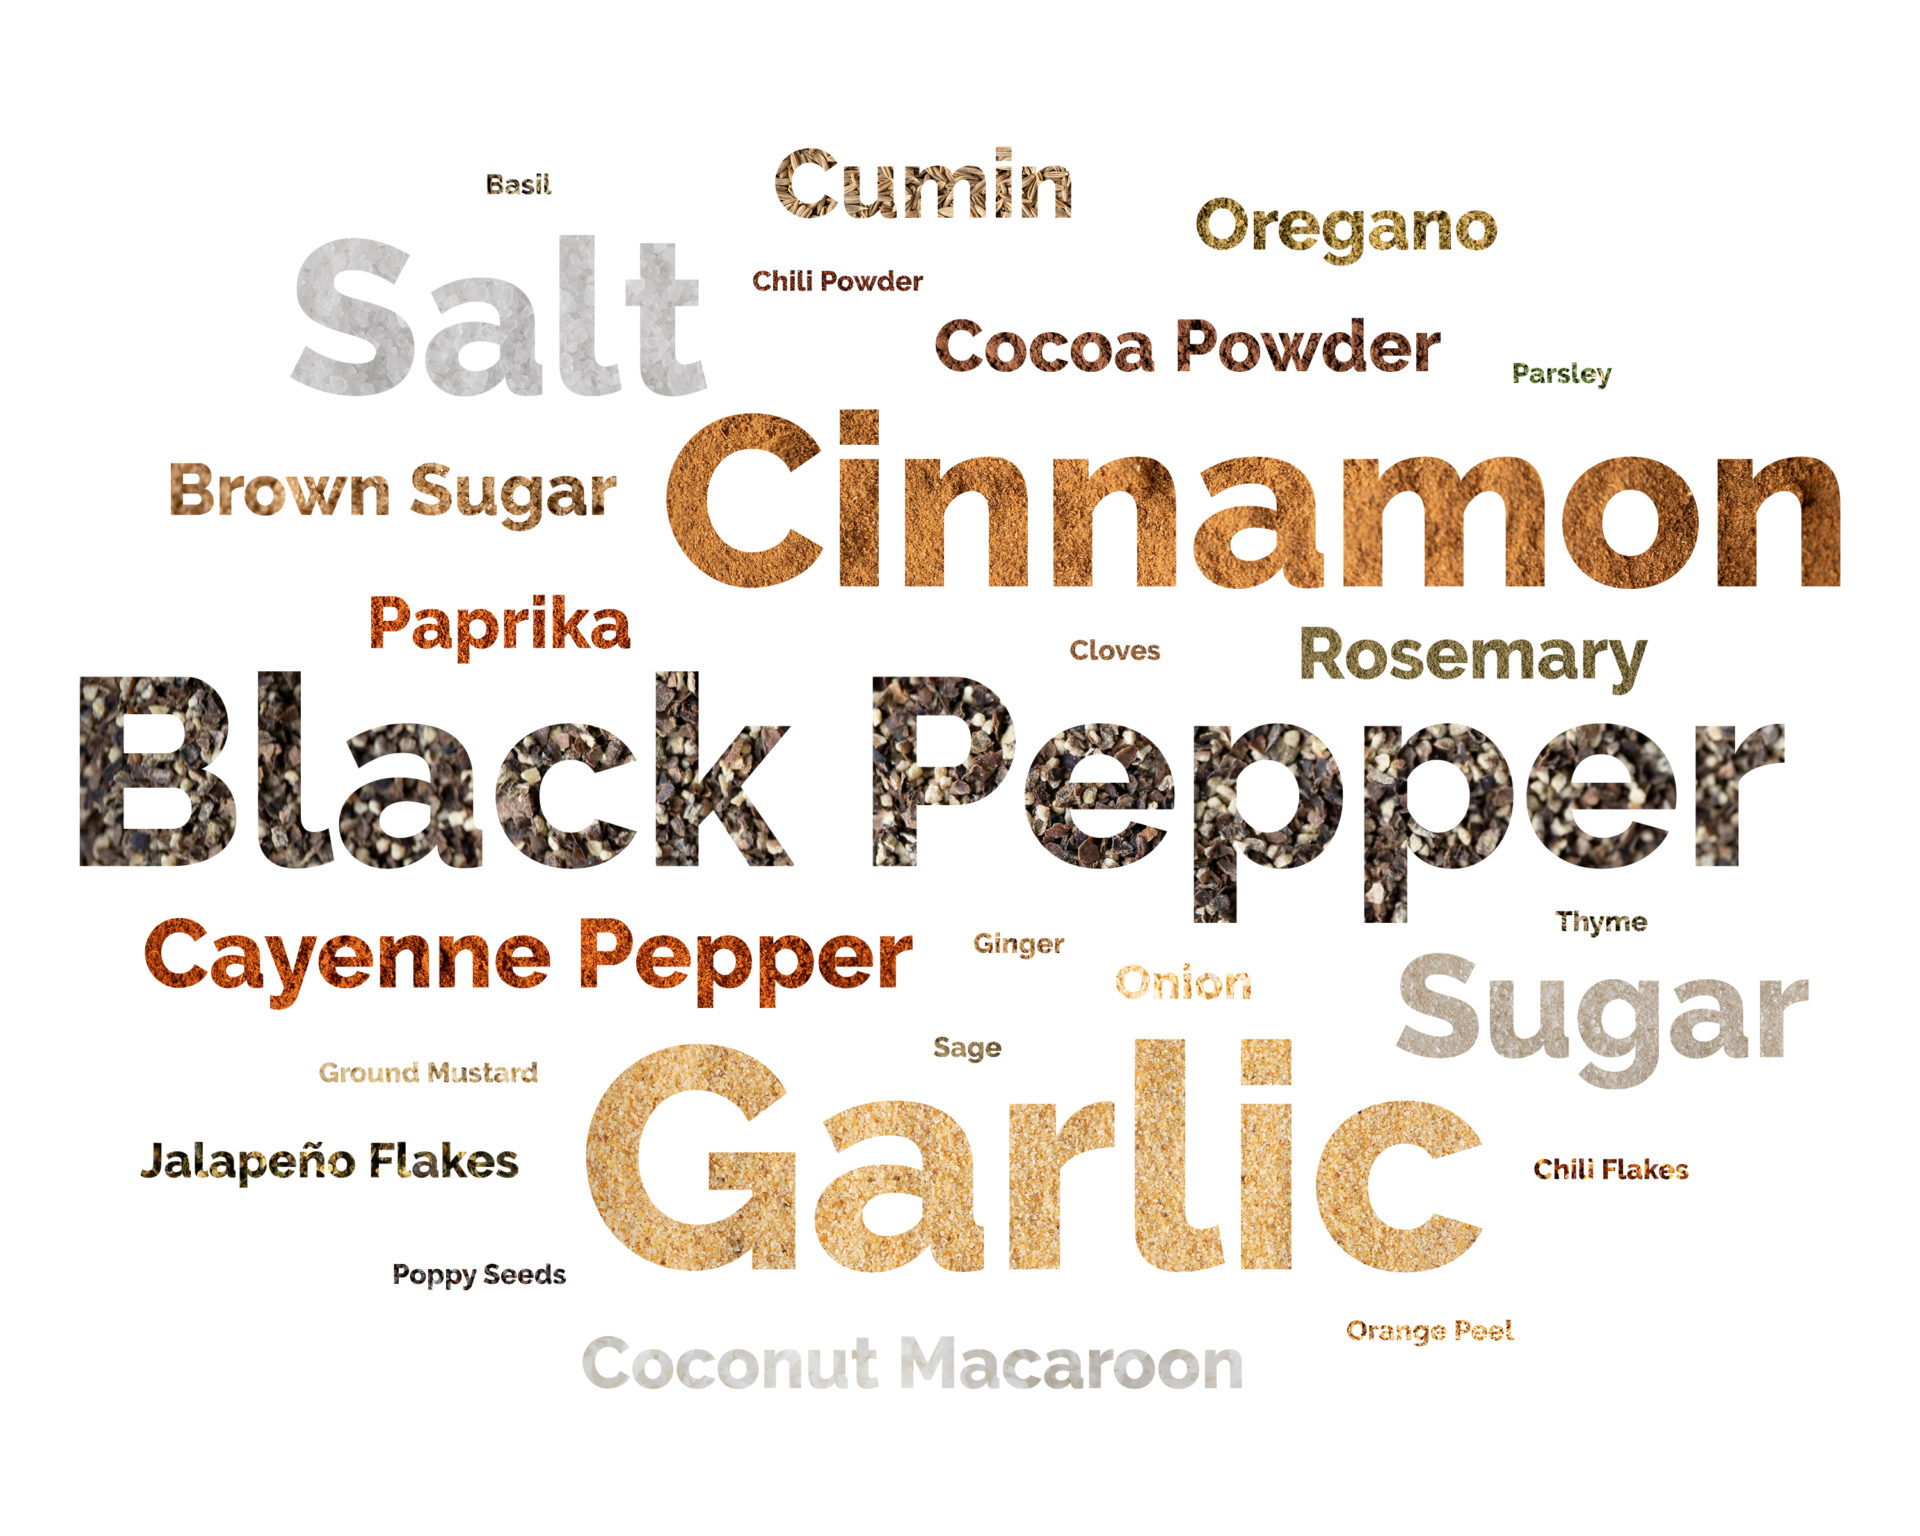 Spice Cloud is made up of various spice names.